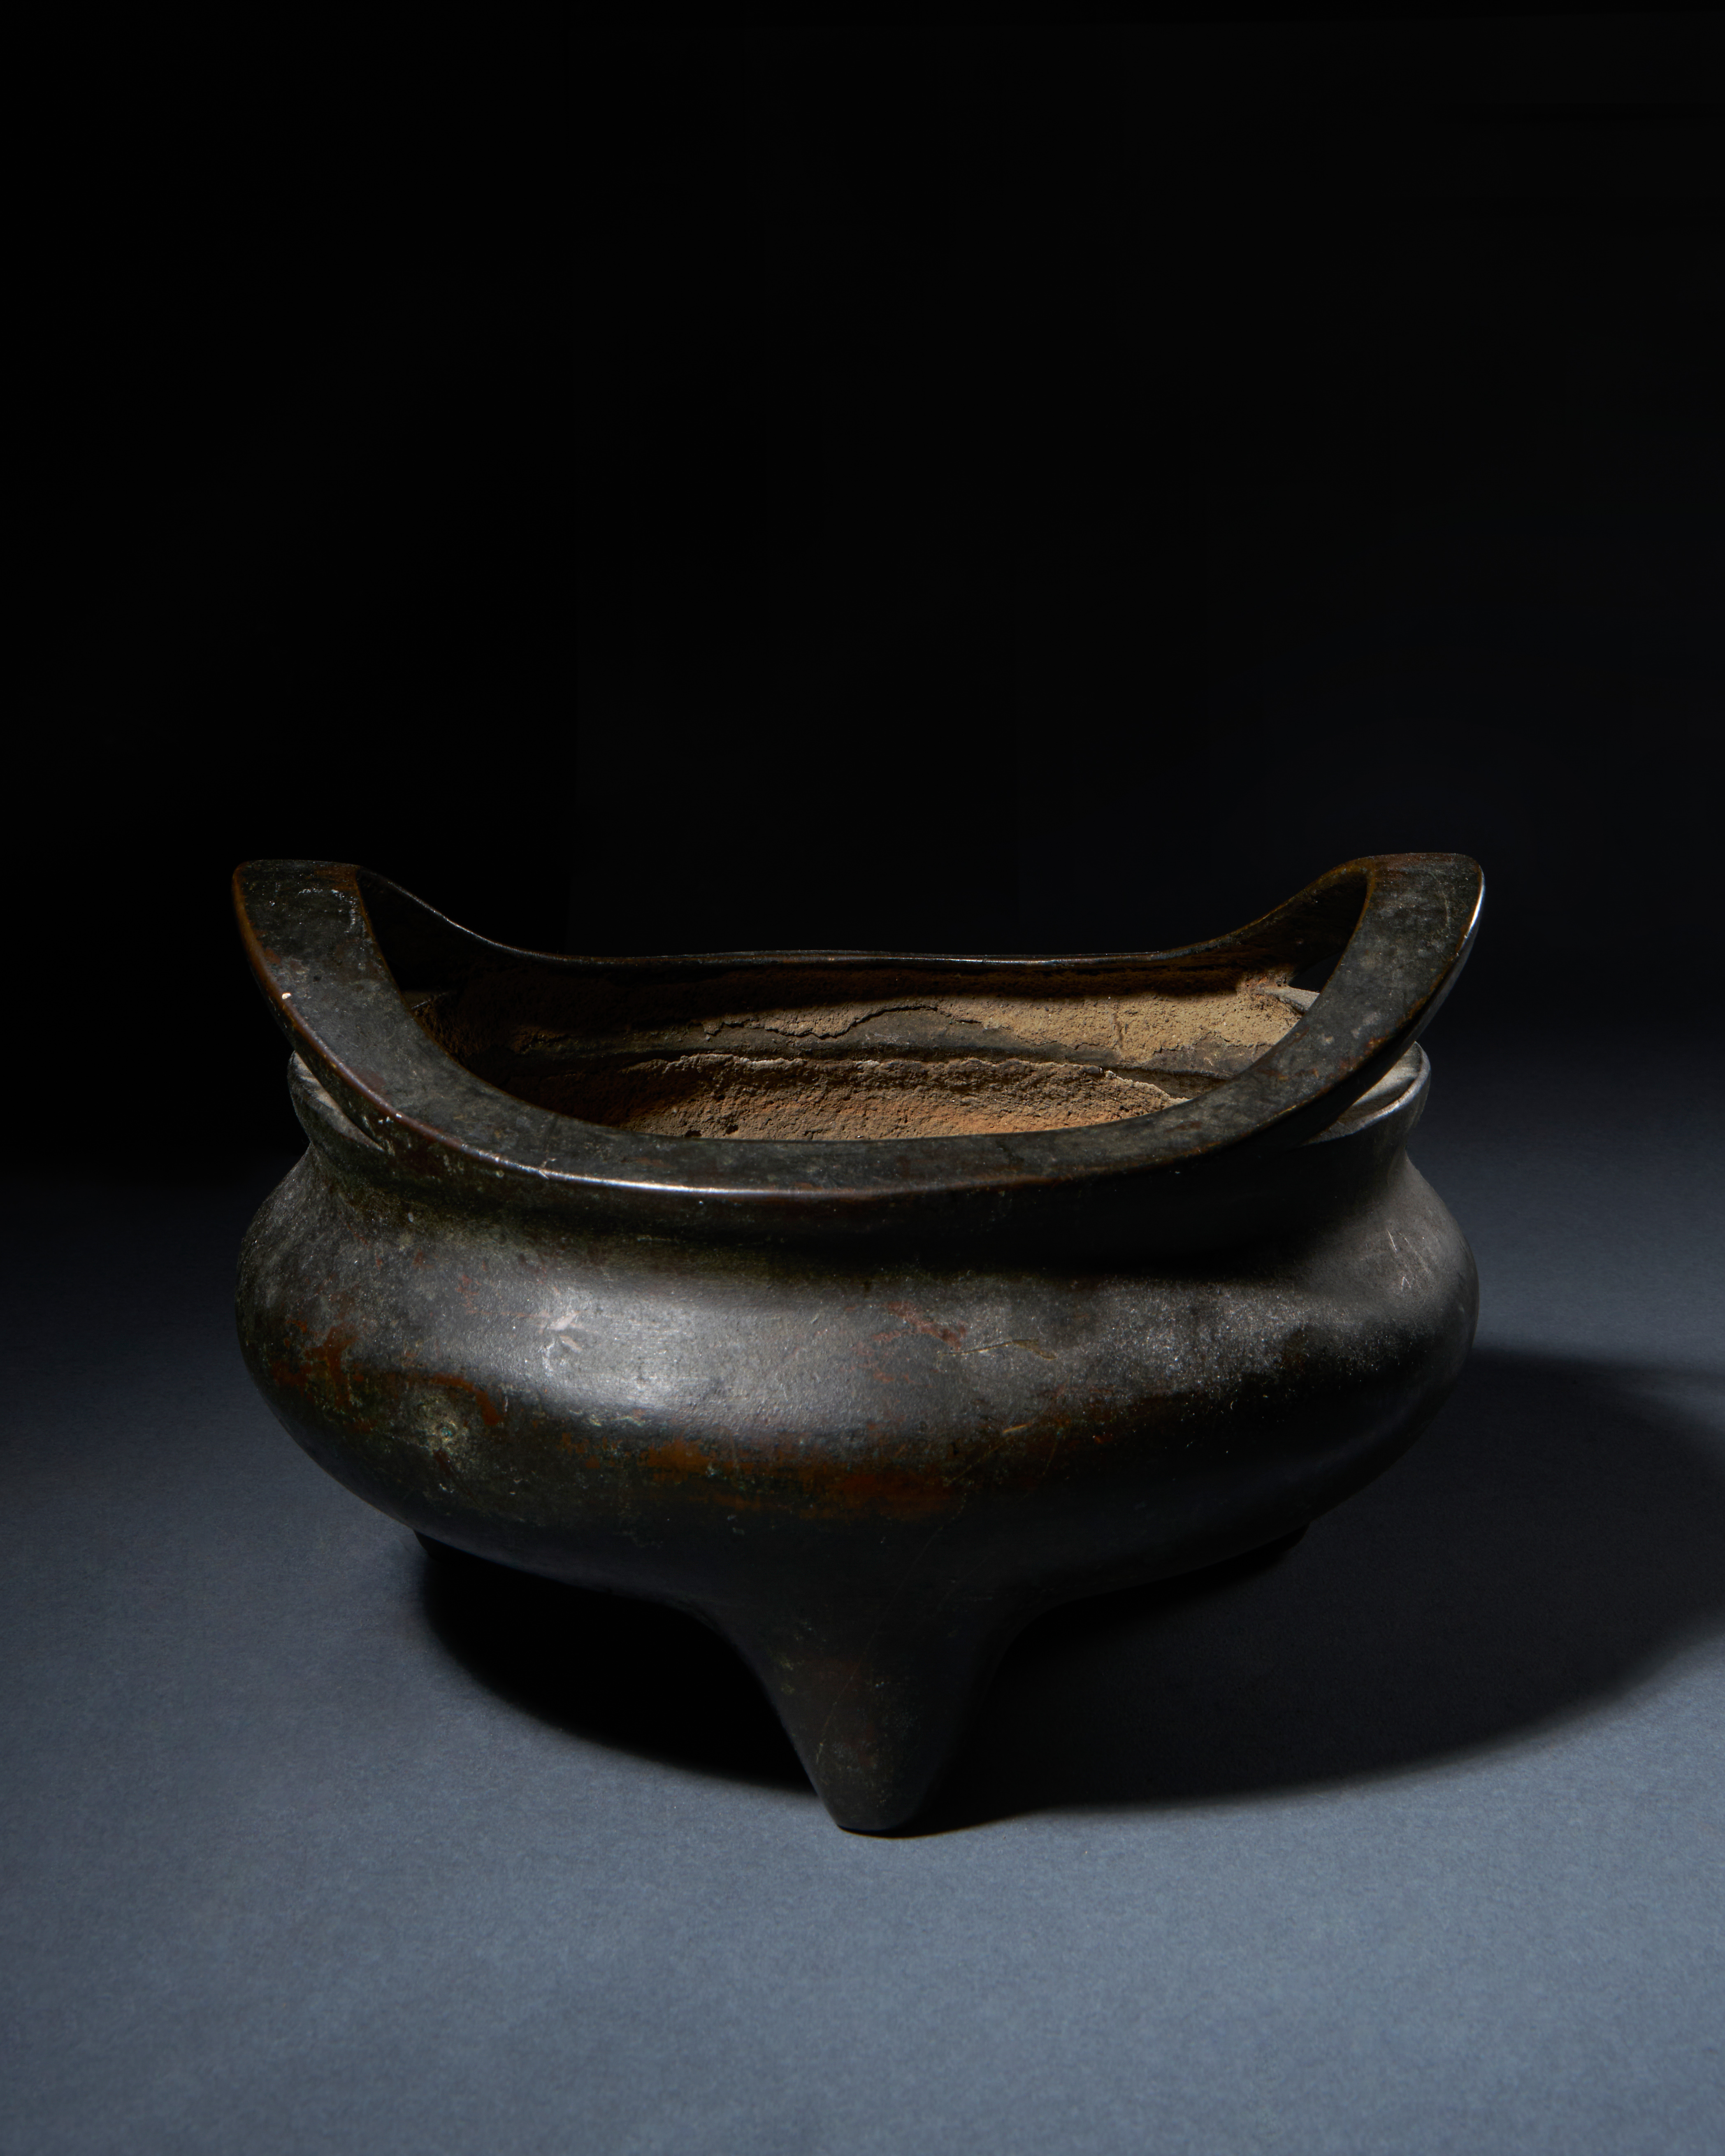 A LARGE CHINESE BRONZE TRIPOD CENSER, QING DYNASTY (1644-1911)